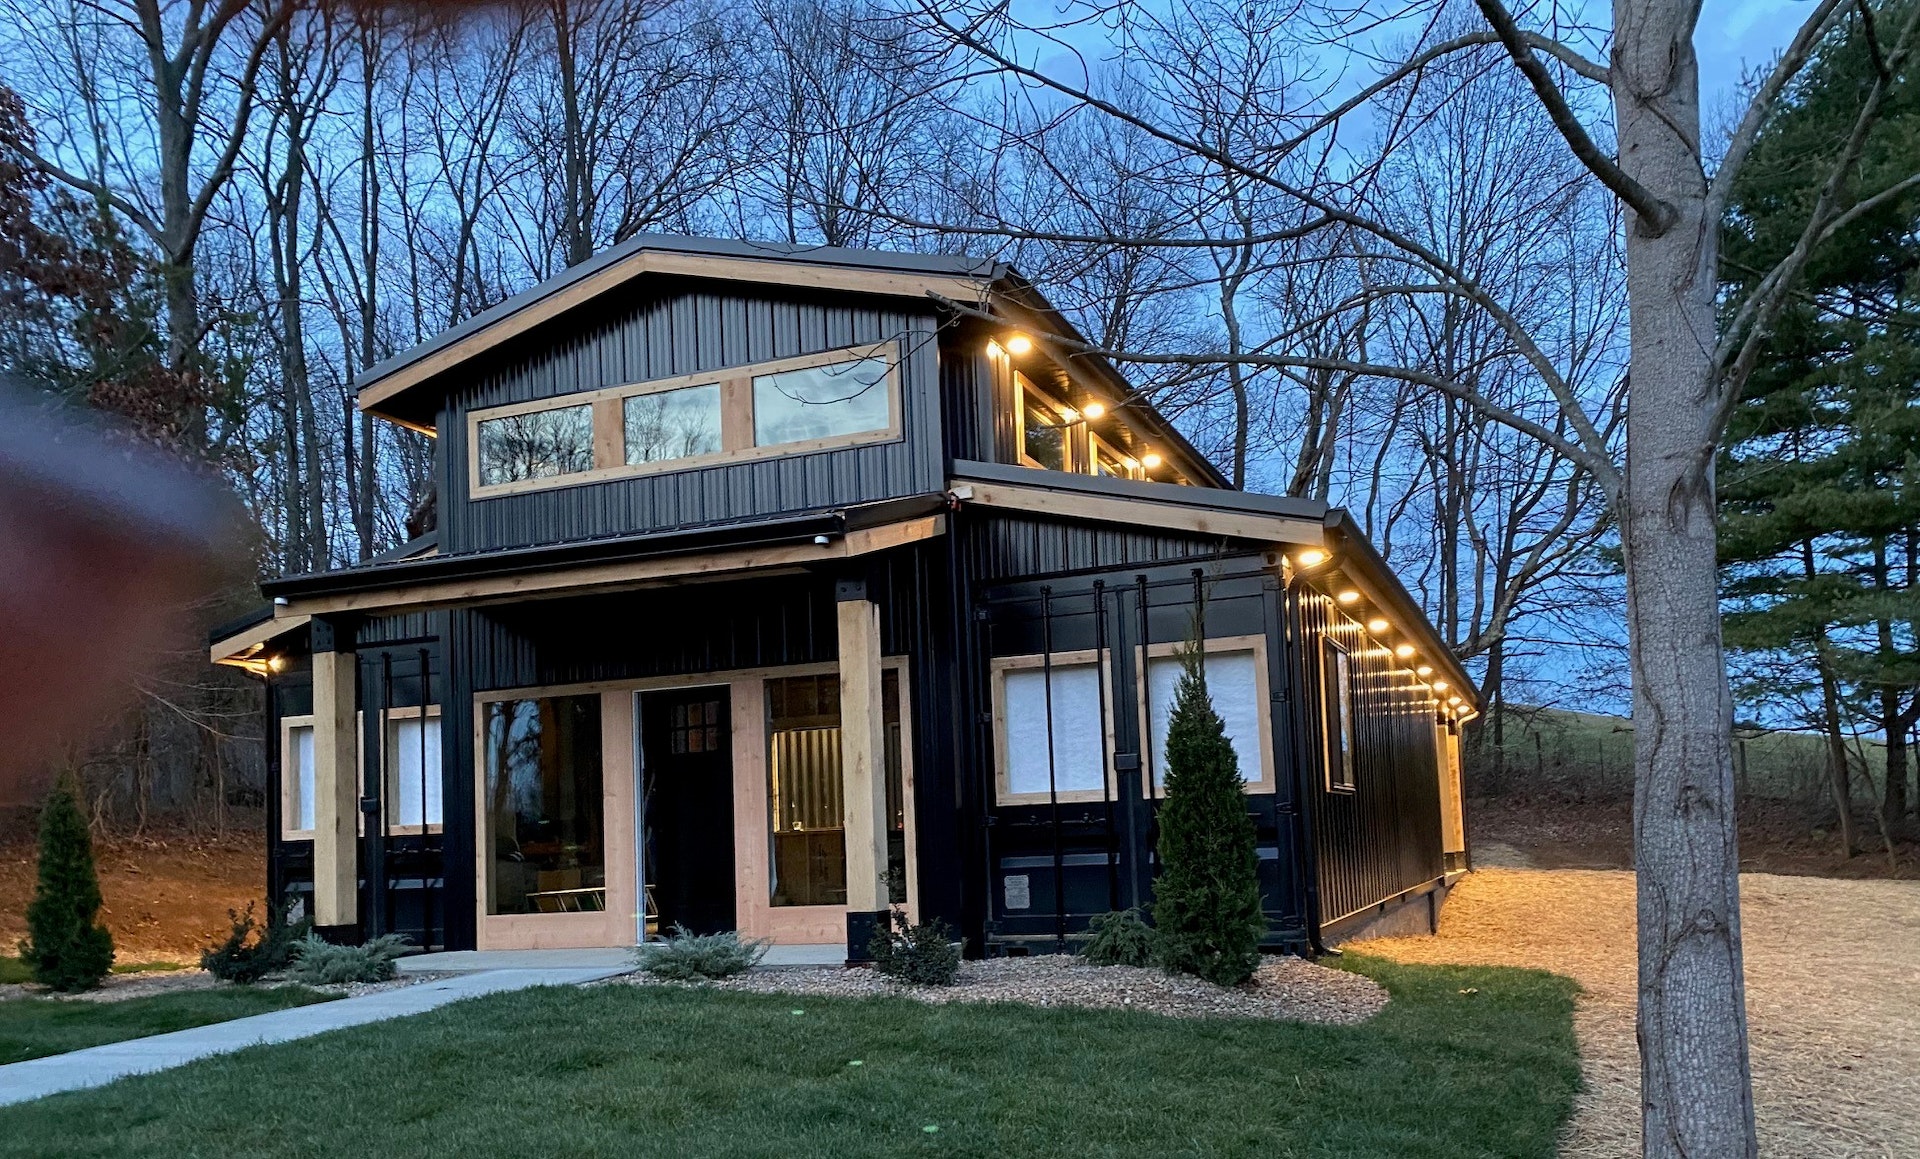 Exterior view at night of shipping container home